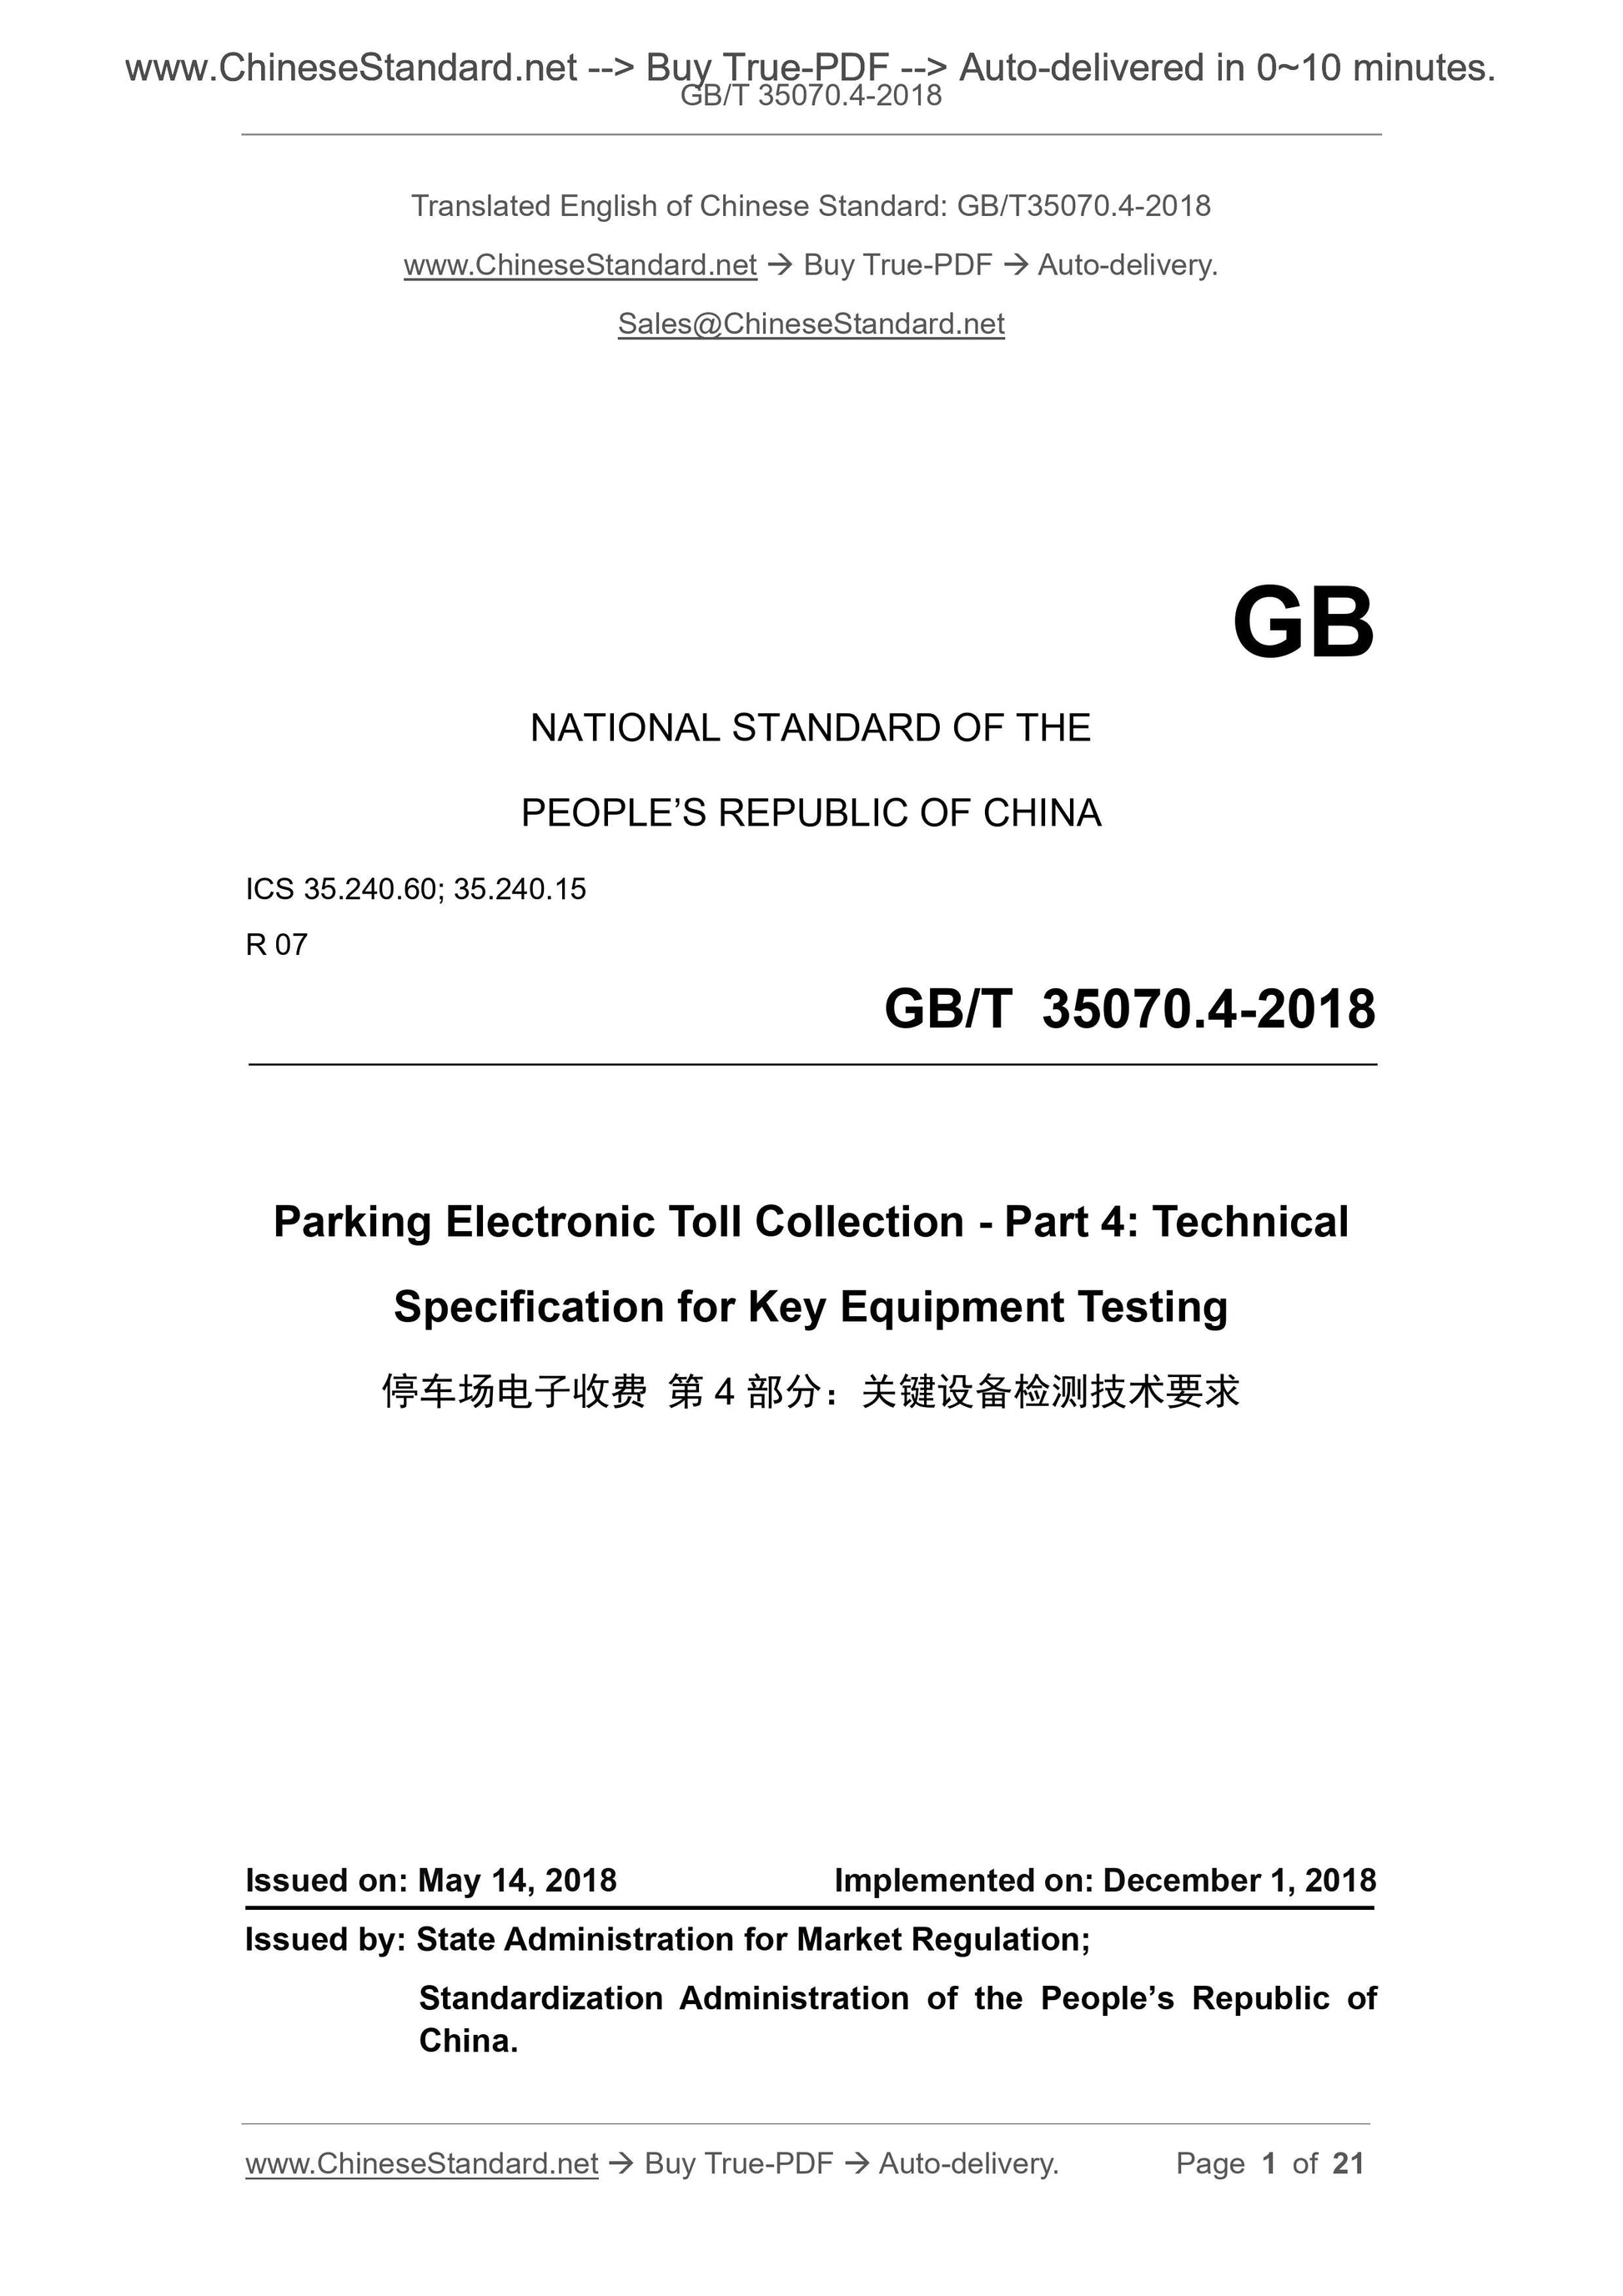 GB/T 35070.4-2018 Page 1